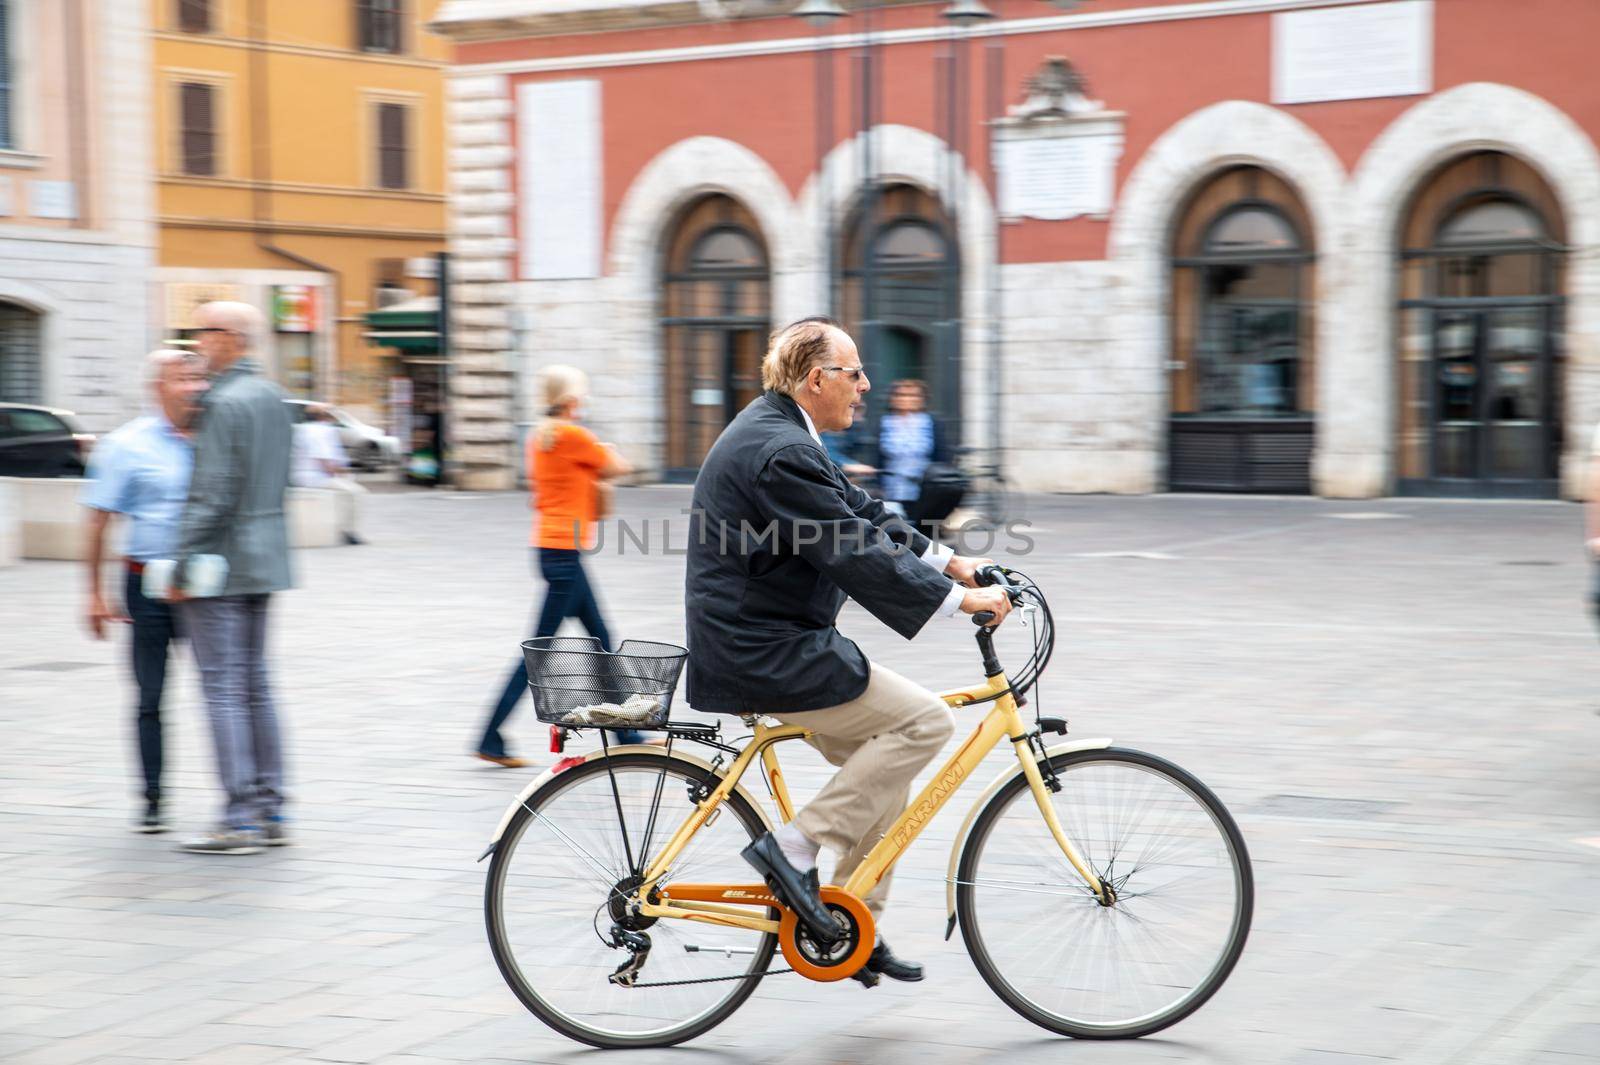 panning of a bicycle in the city of terni by carfedeph